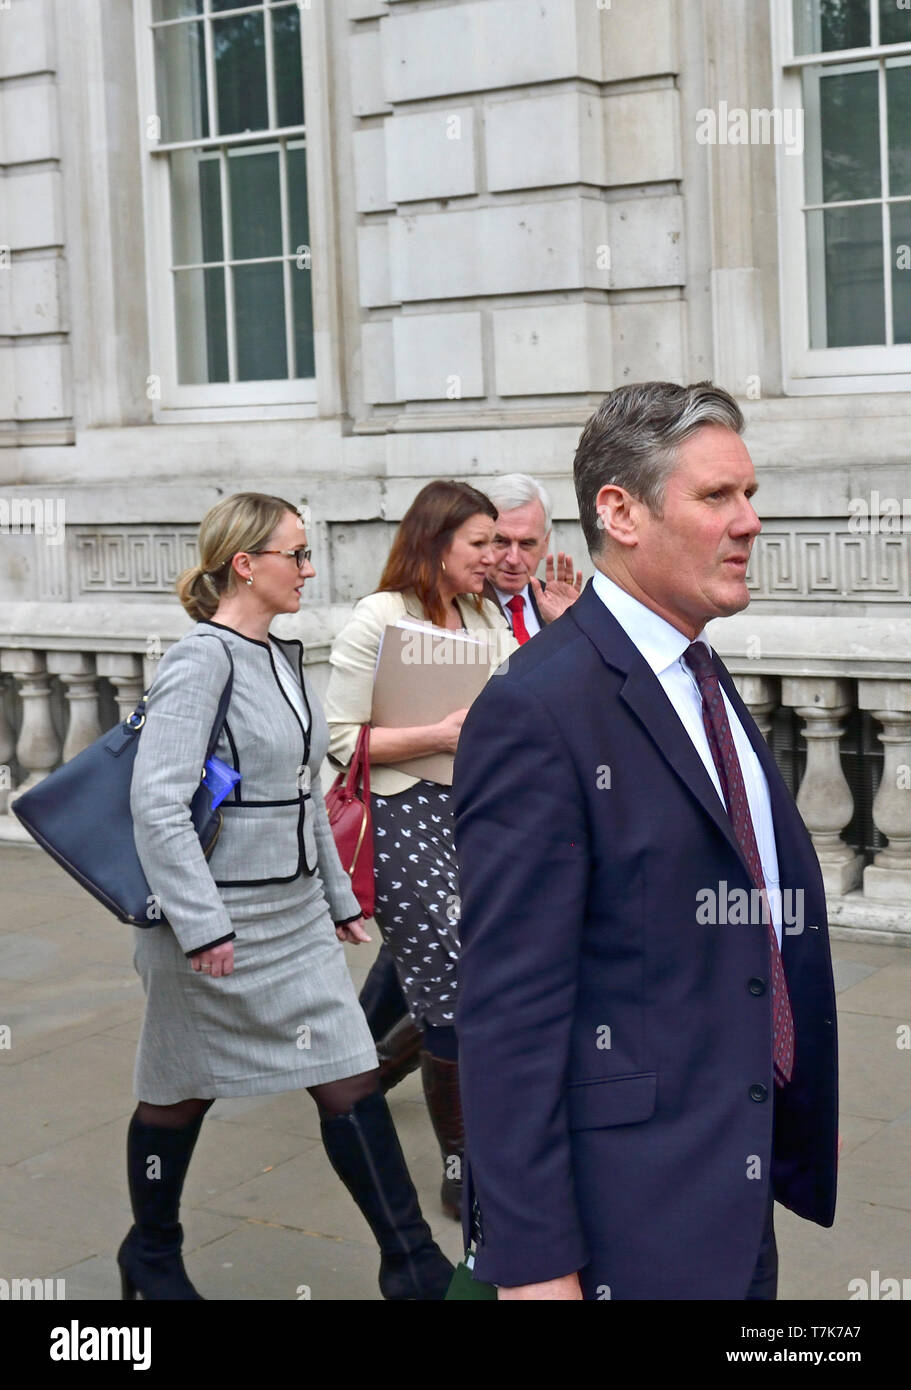 London, UK. 7th May, 2019. The Labour negotiating team arrive at the Cabinet Office in Whitehall for further negotiation with Government representitives on a Brexit deal. Sir Keir Starmer, Rebecca Long-Bailey, Sue Hayman and John McDonnell arrive Credit: PjrFoto/Alamy Live News Stock Photo